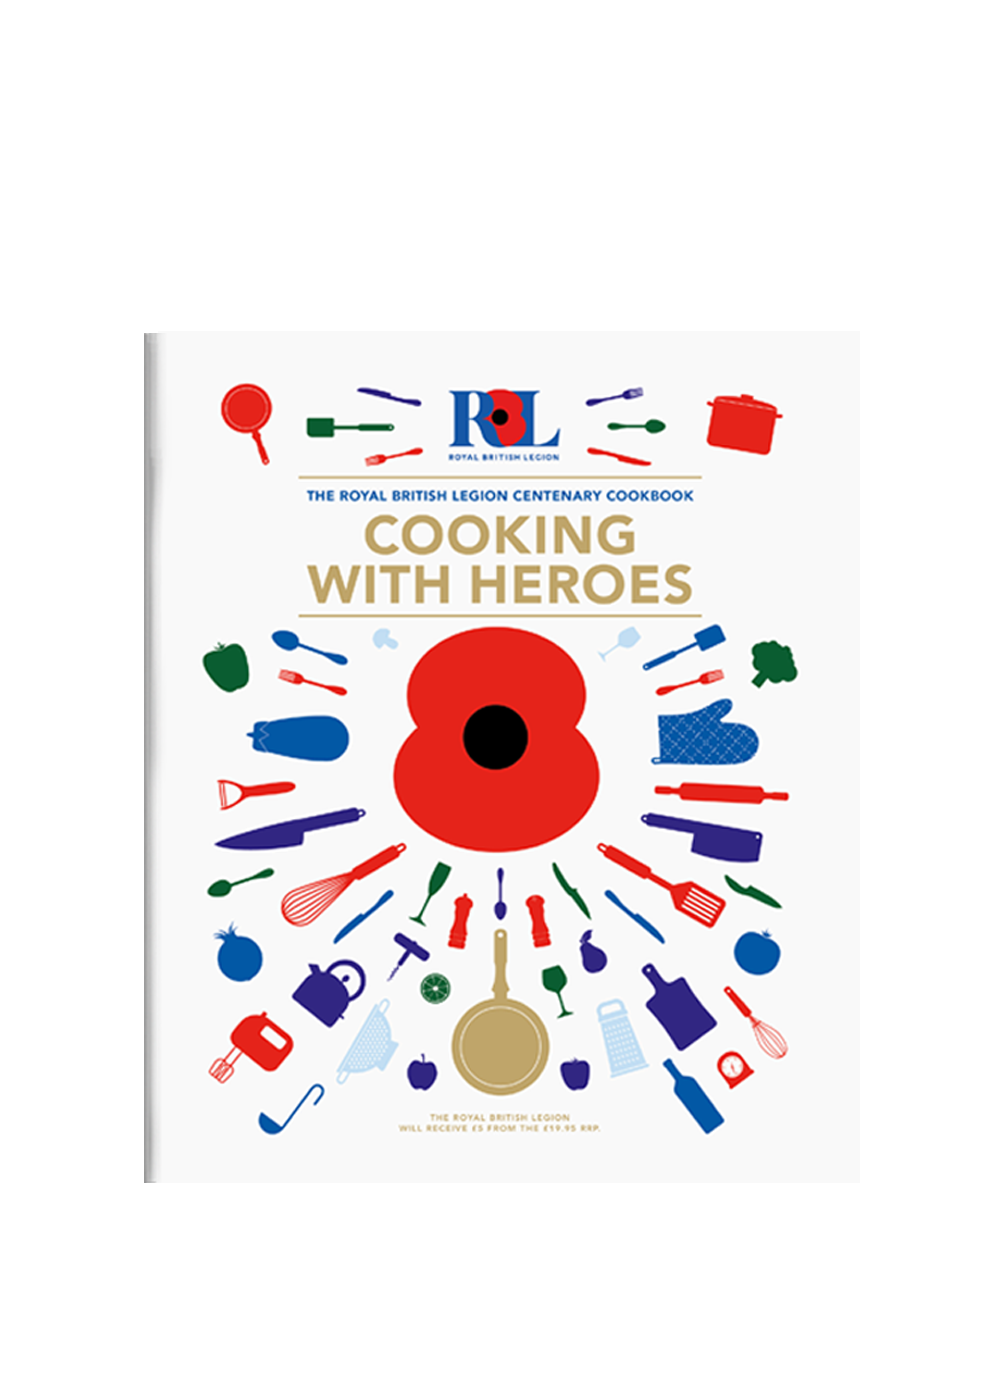 This year, The Royal British Legion are celebrating a century of supporting our troops, championing our champions with a special cookbook with recipes from heroes and supporters alike.